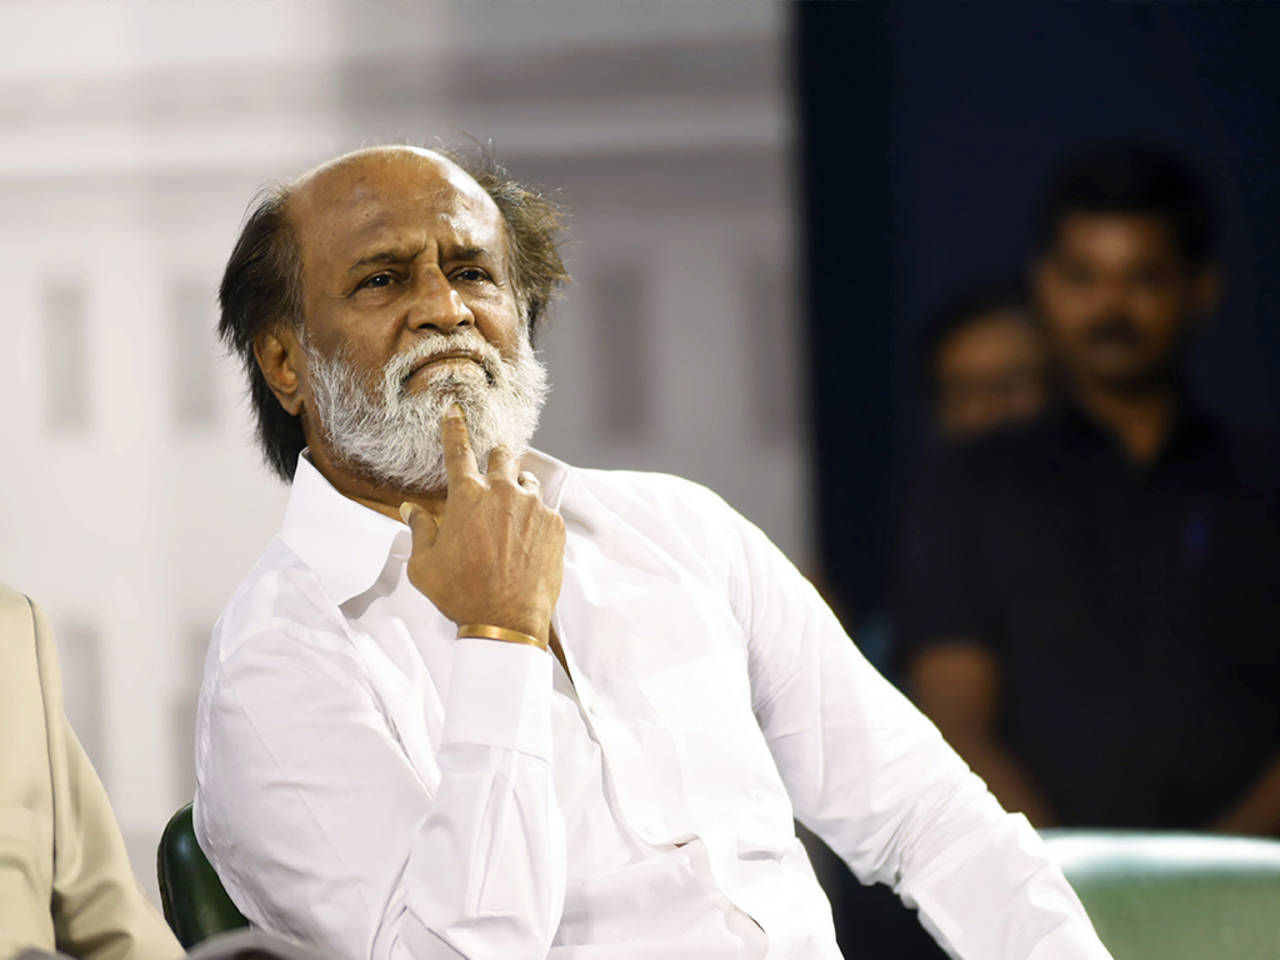 Police withdraw security to Rajini's house after his request ...